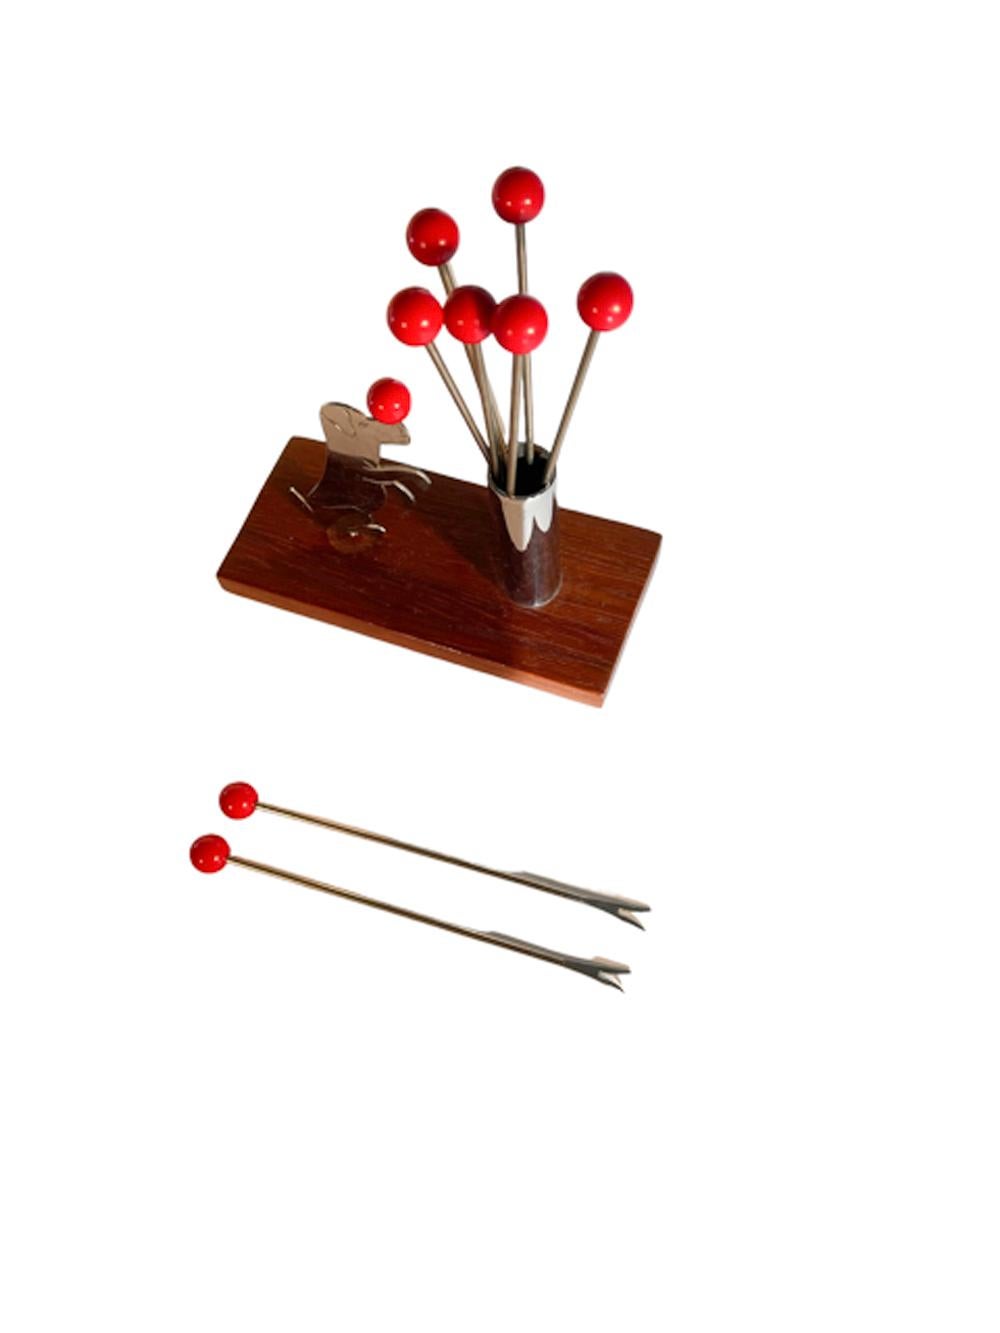 Art Deco cocktail pick set having a chrome cylinder on a wood base holding 8 ball-topped picks with forked tips next to a chrome figure of a dog sitting up and balancing a ball on its nose.